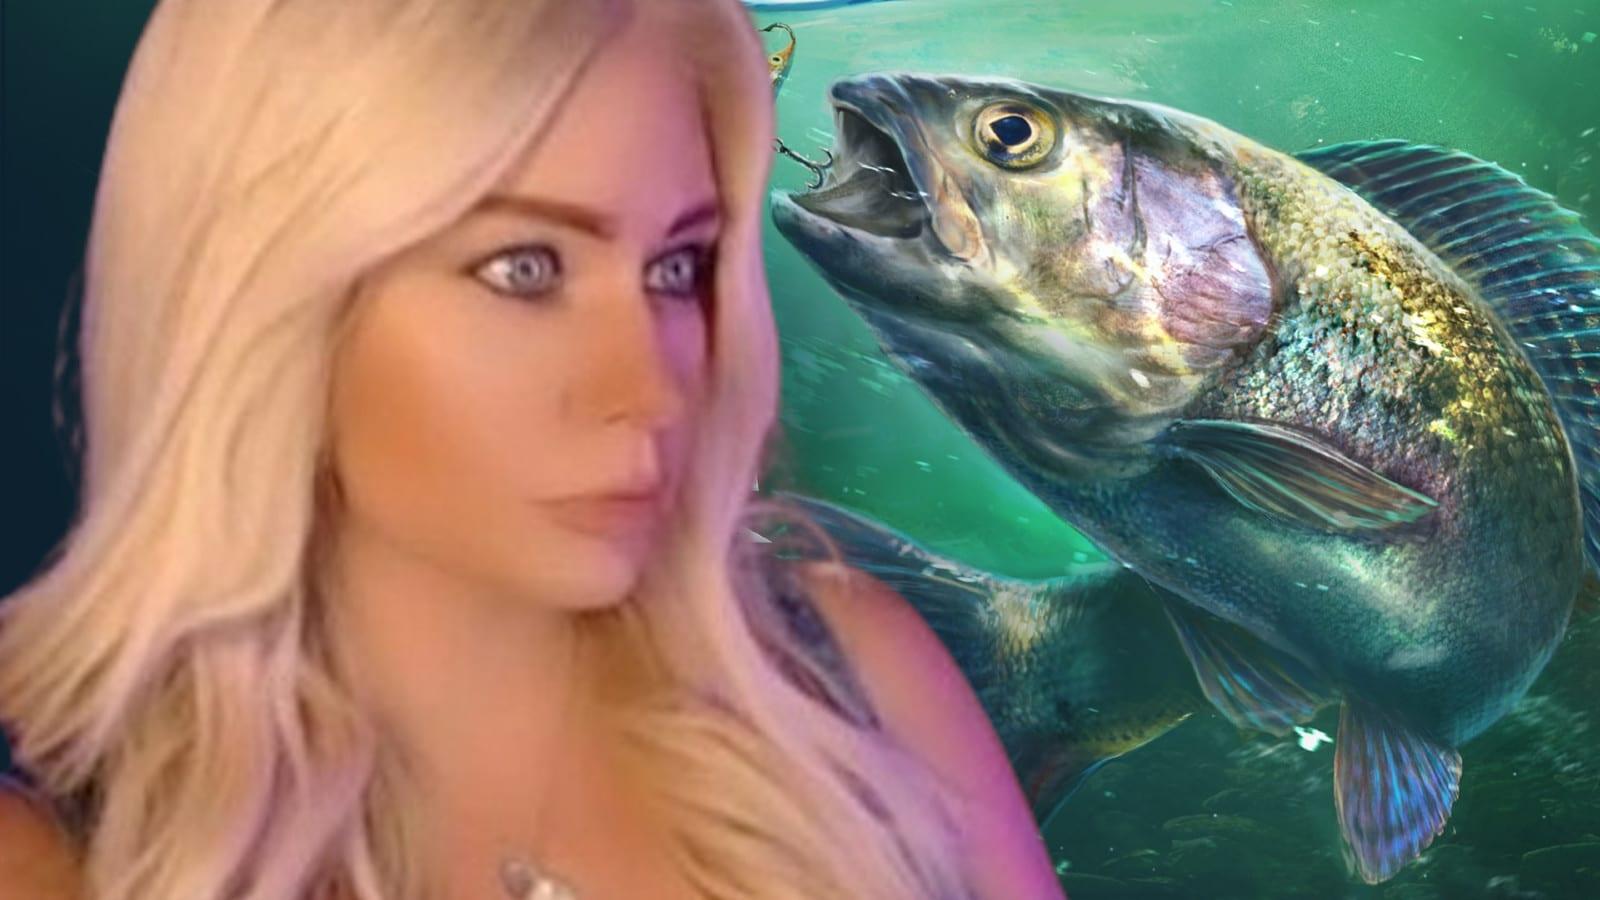 Twitch Streamer banned for sexual content in fishing broadcast